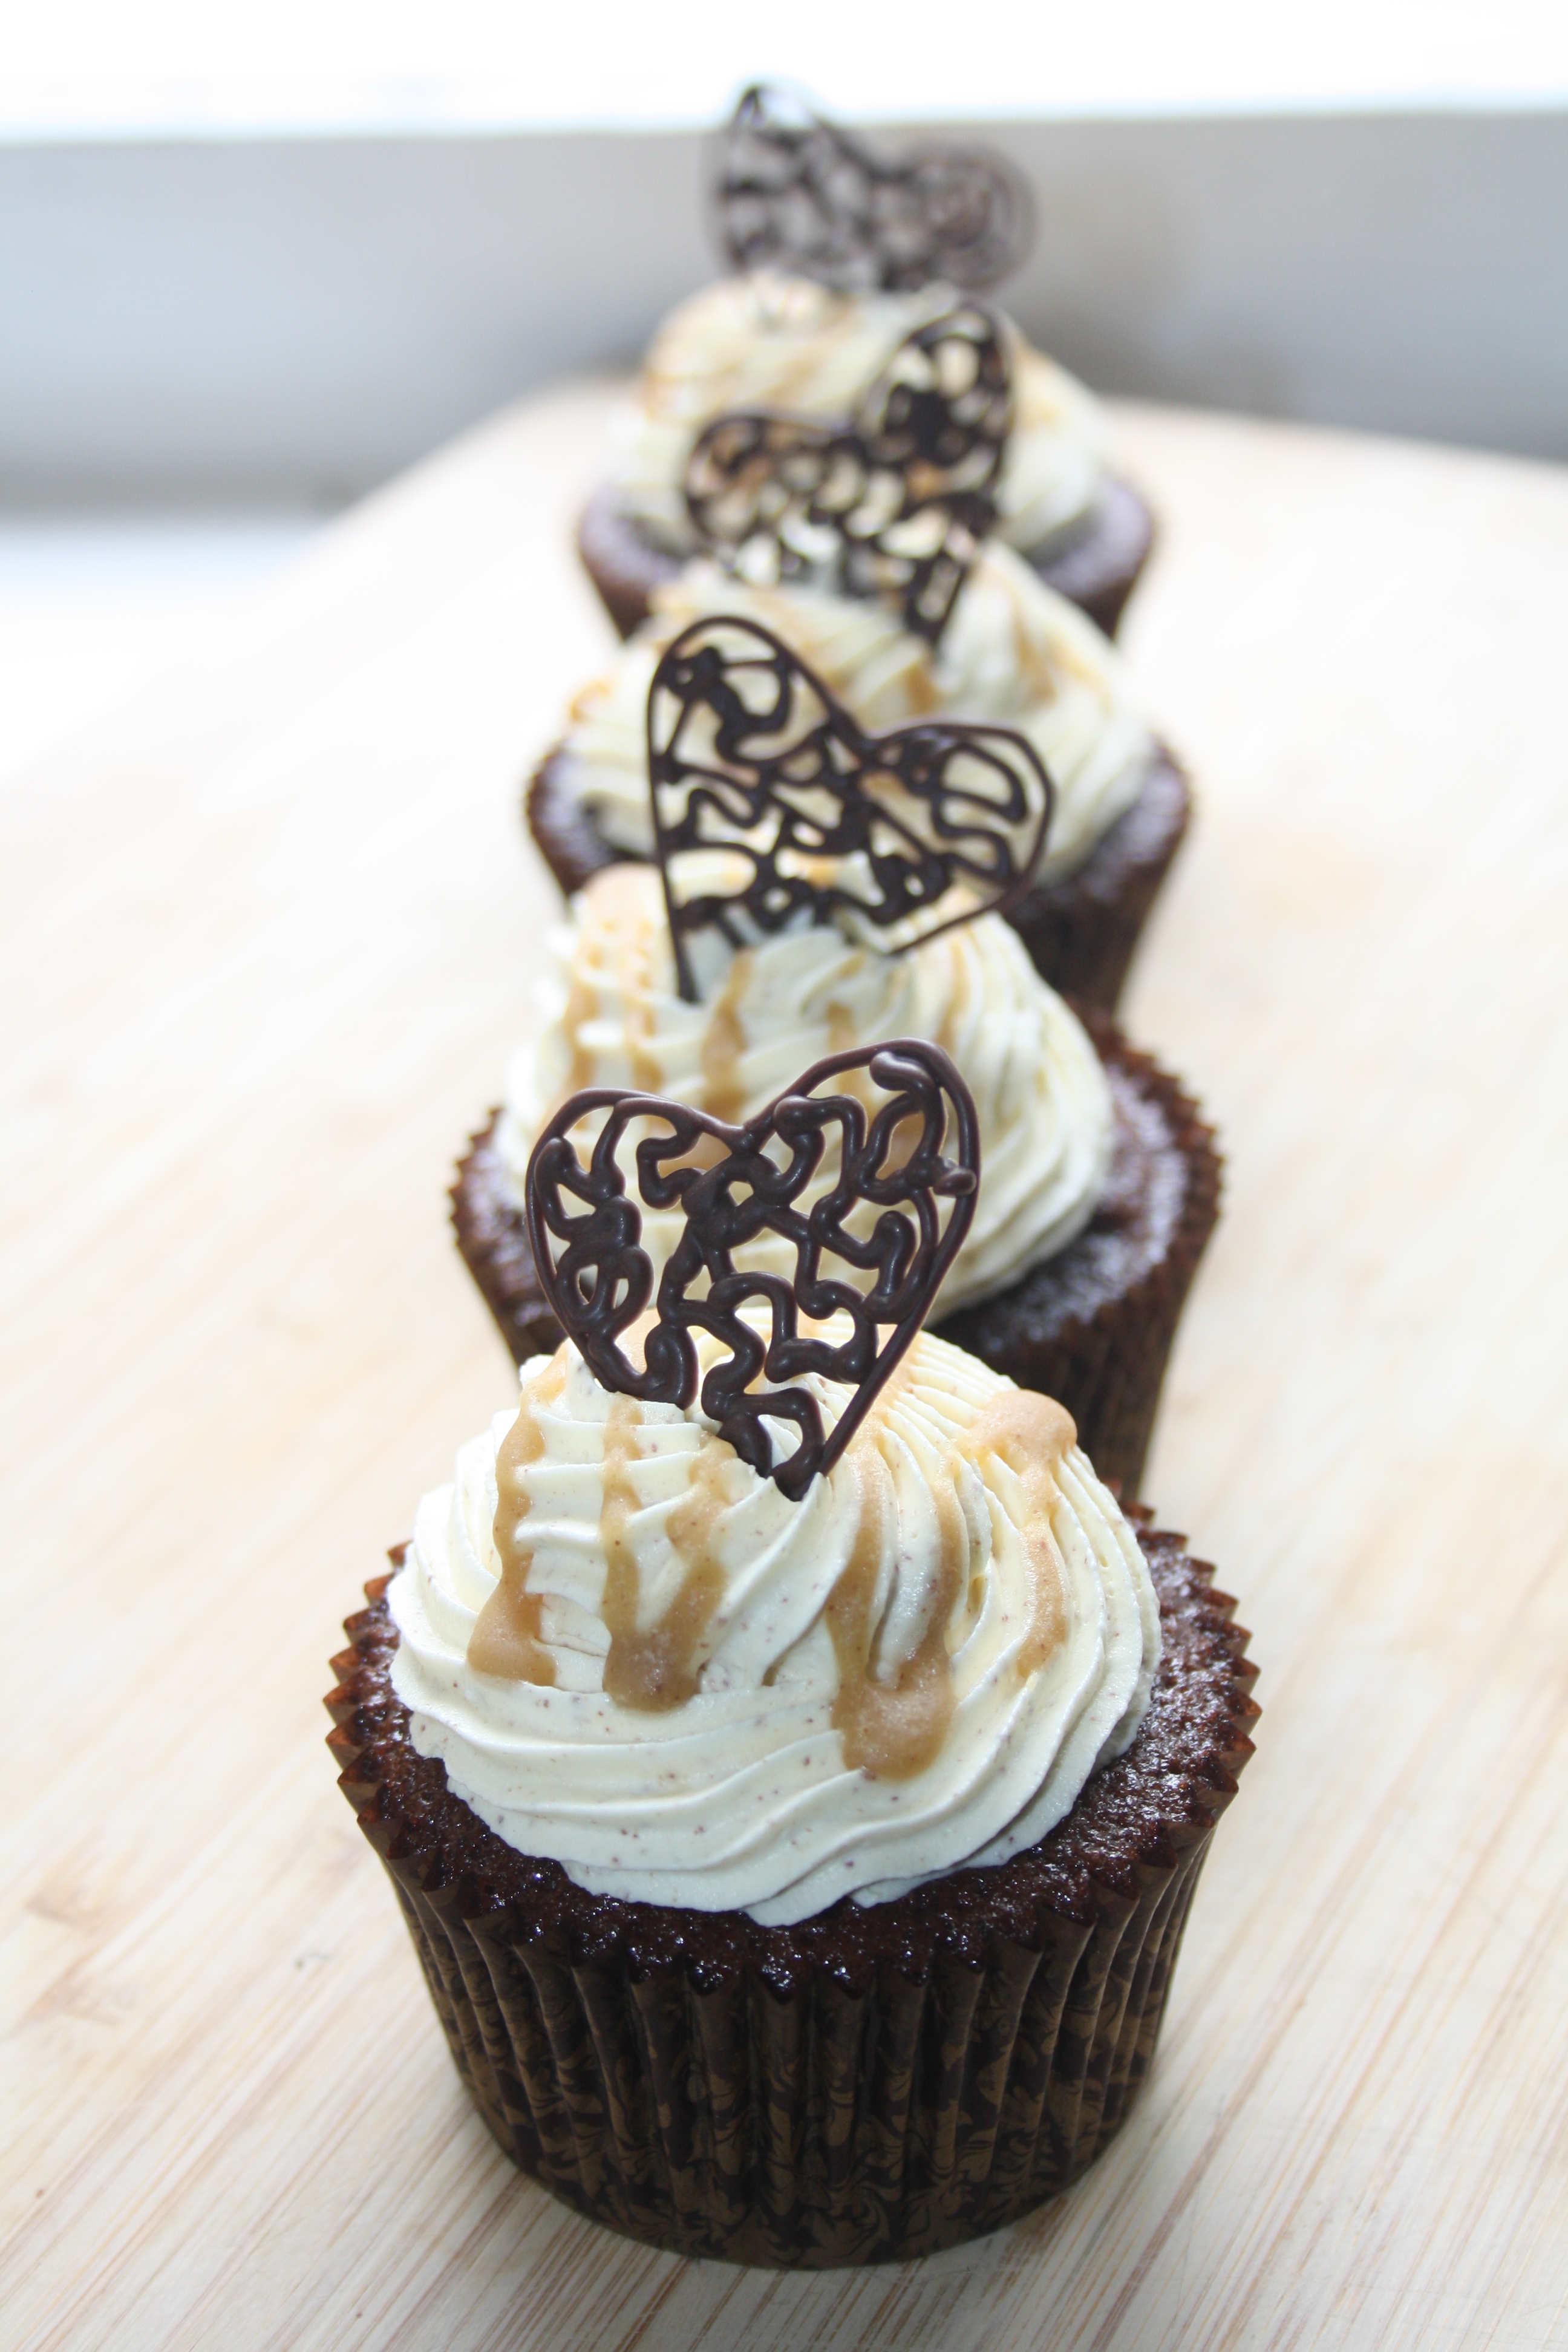 Chocolate Caramel Cupcakes with Brown Butter Icing and Filigree Hearts | Torte - The Blog